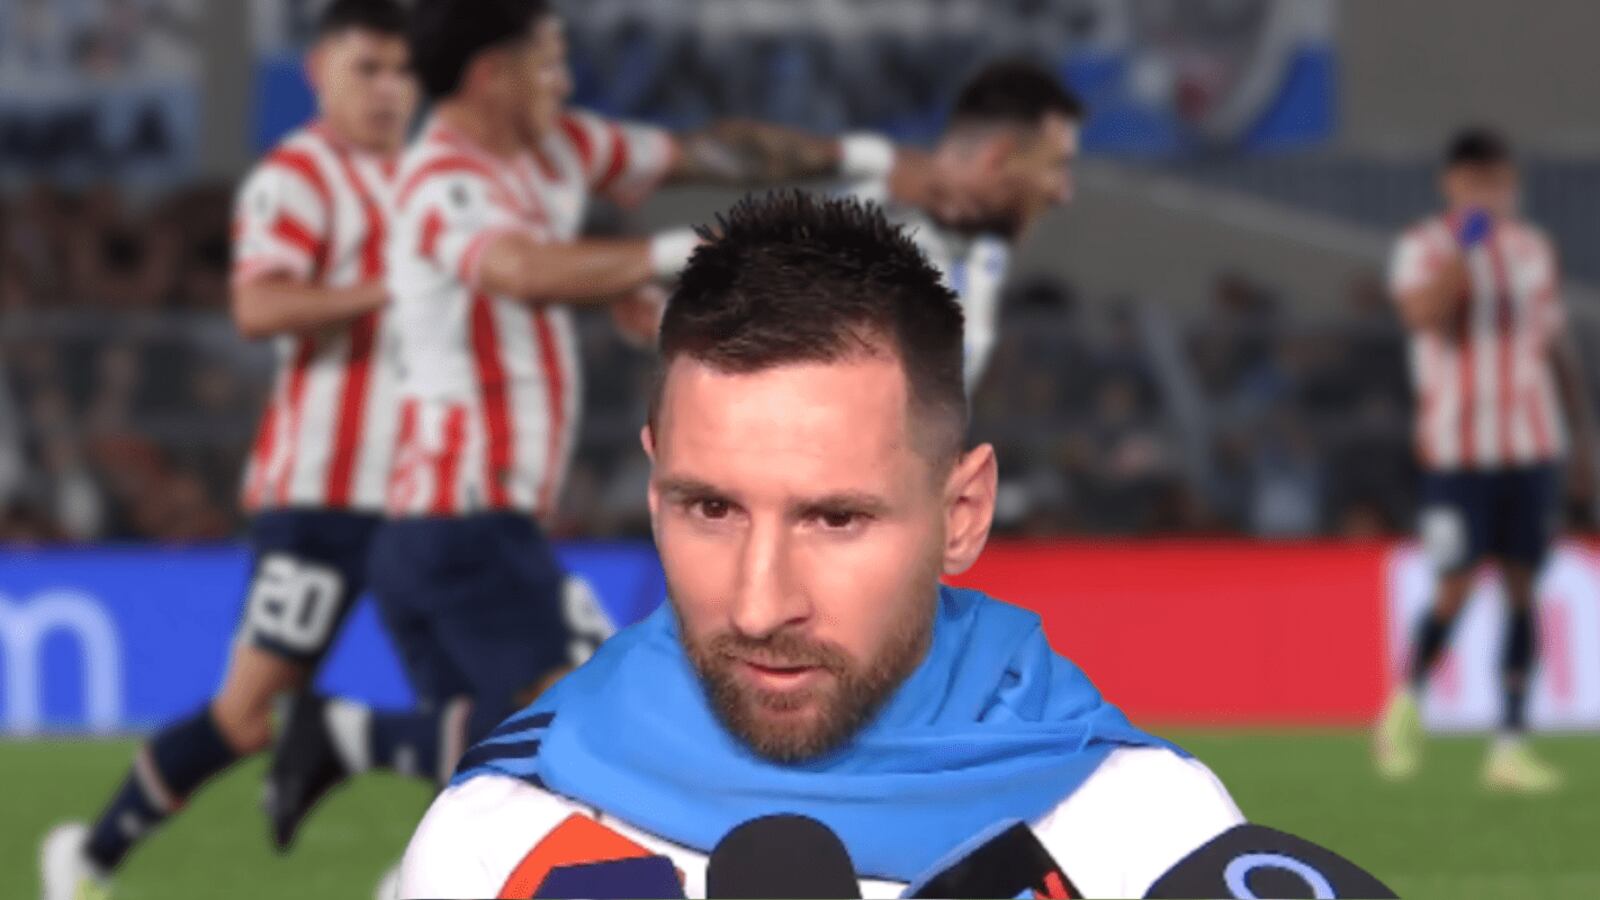 Messi, upset, spoke after the incident with a Paraguayan footballer